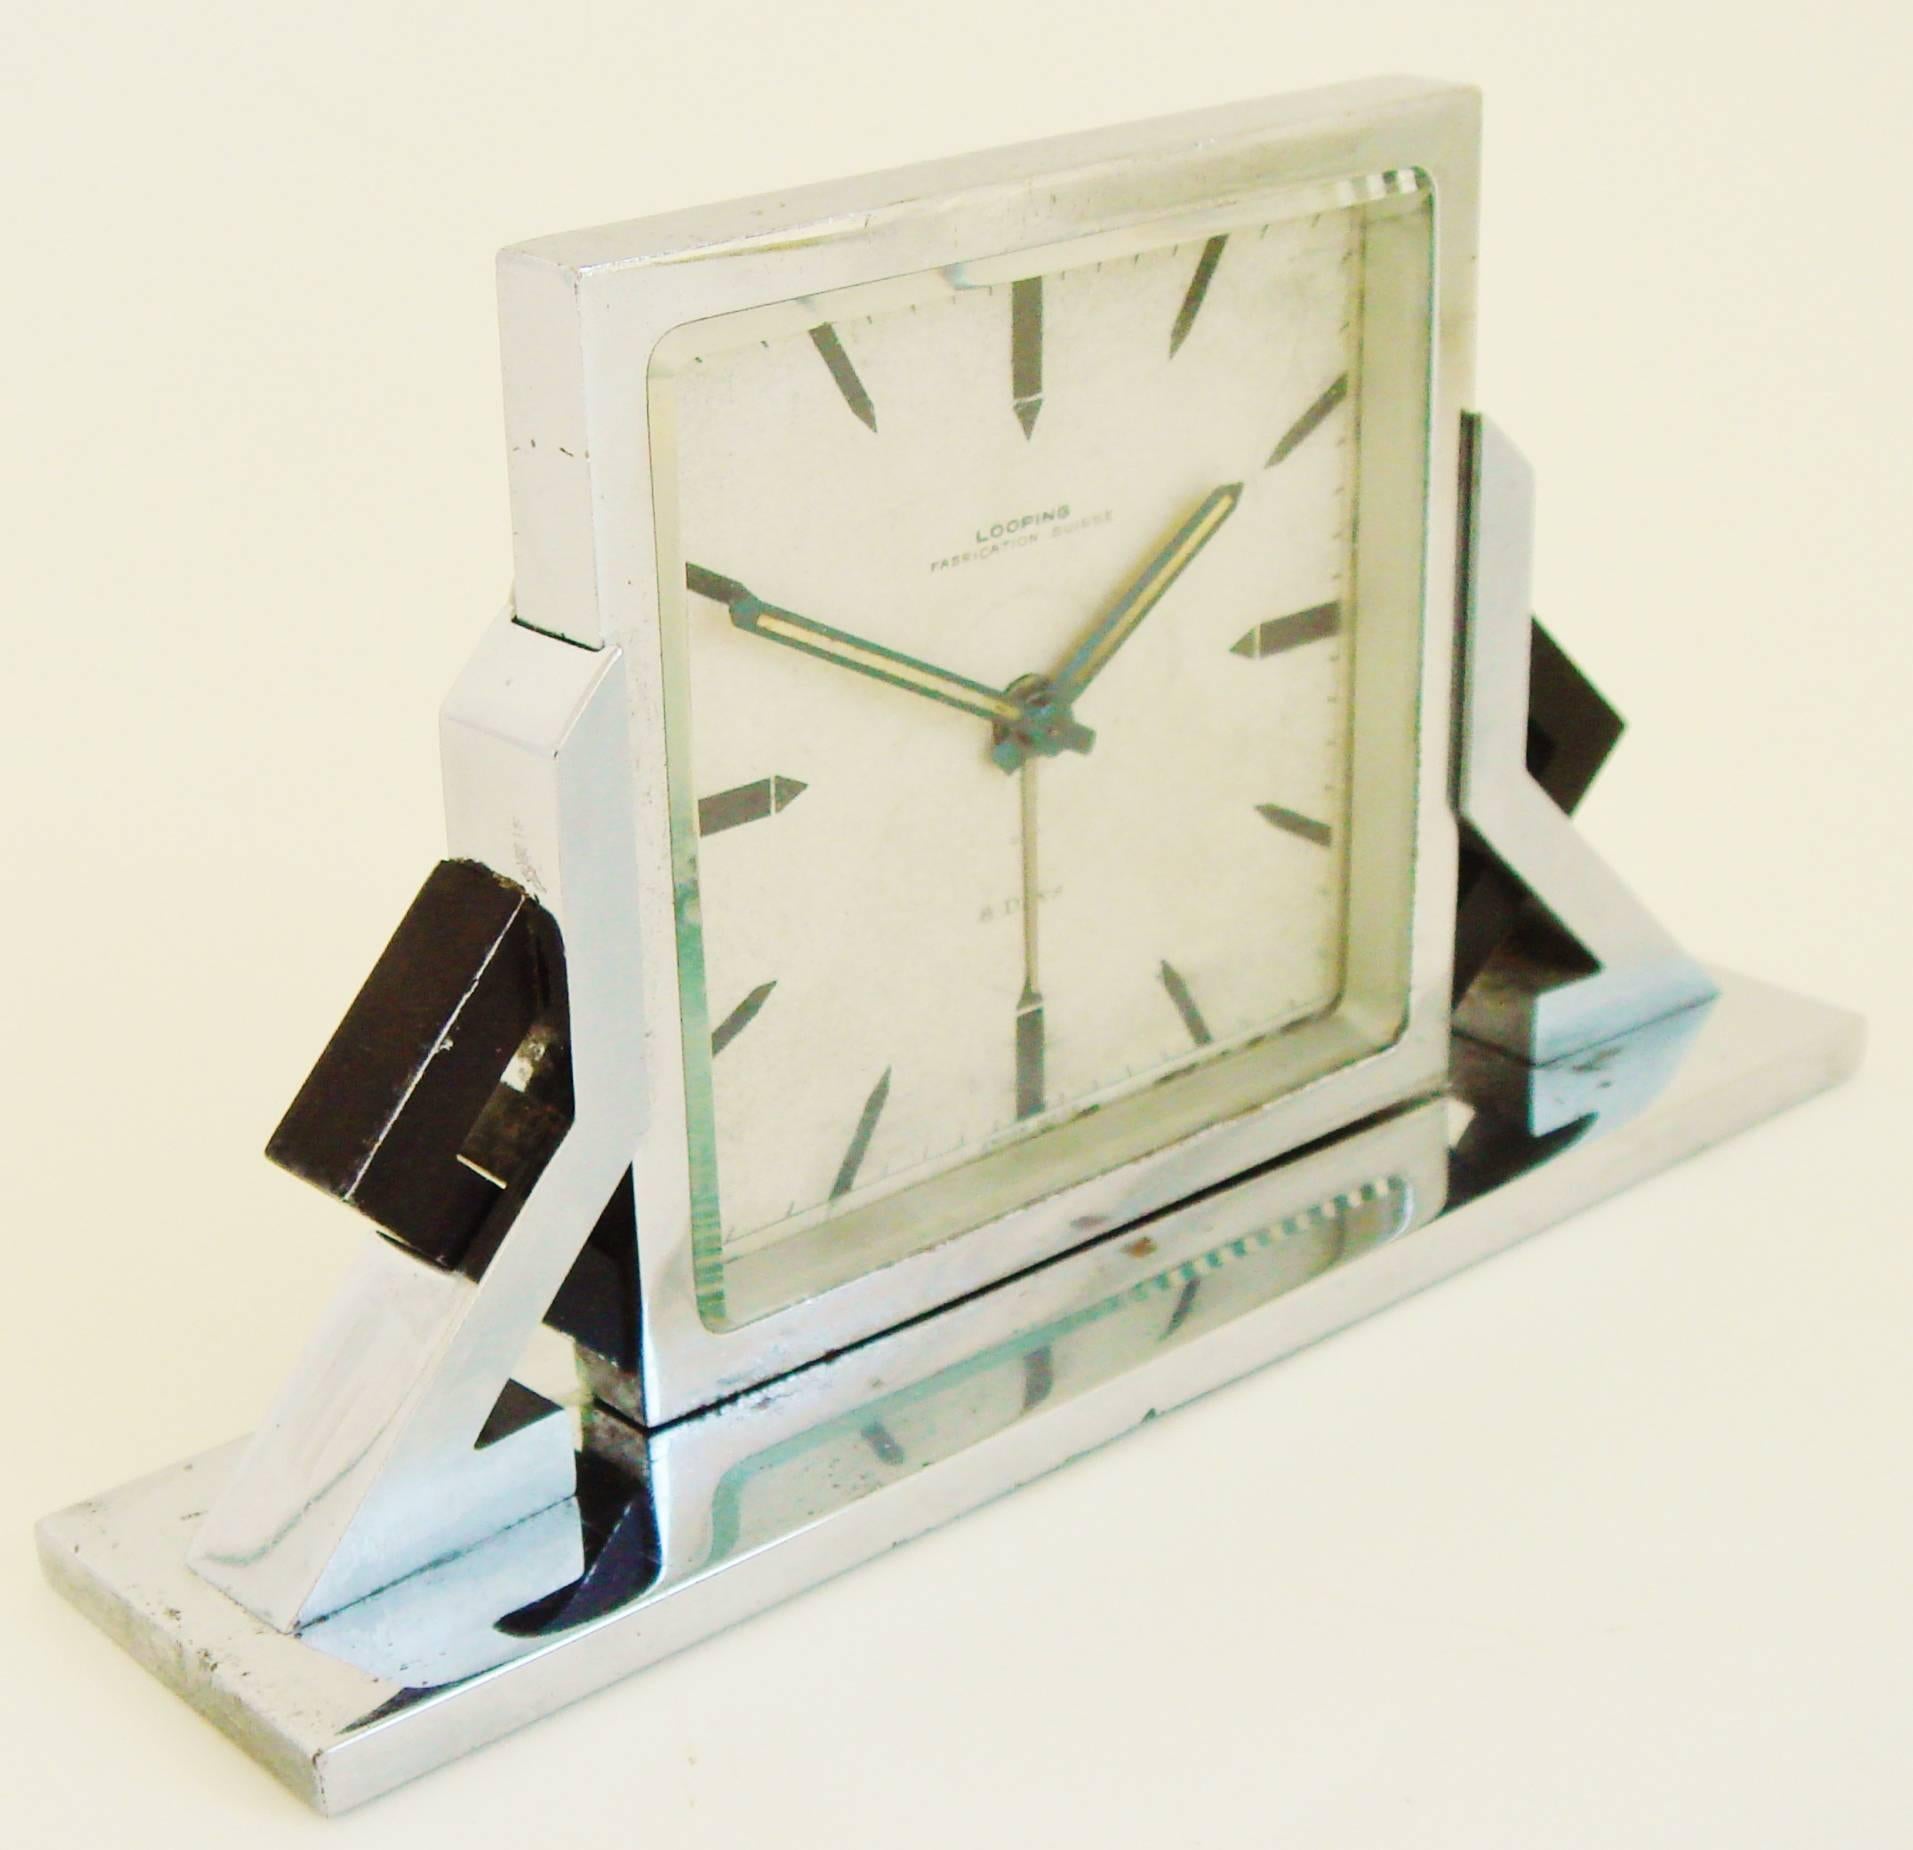 Swiss Art Deco Chrome and Black Enamel Geometric 8-Day Alarm Clock by Looping In Good Condition For Sale In Port Hope, ON